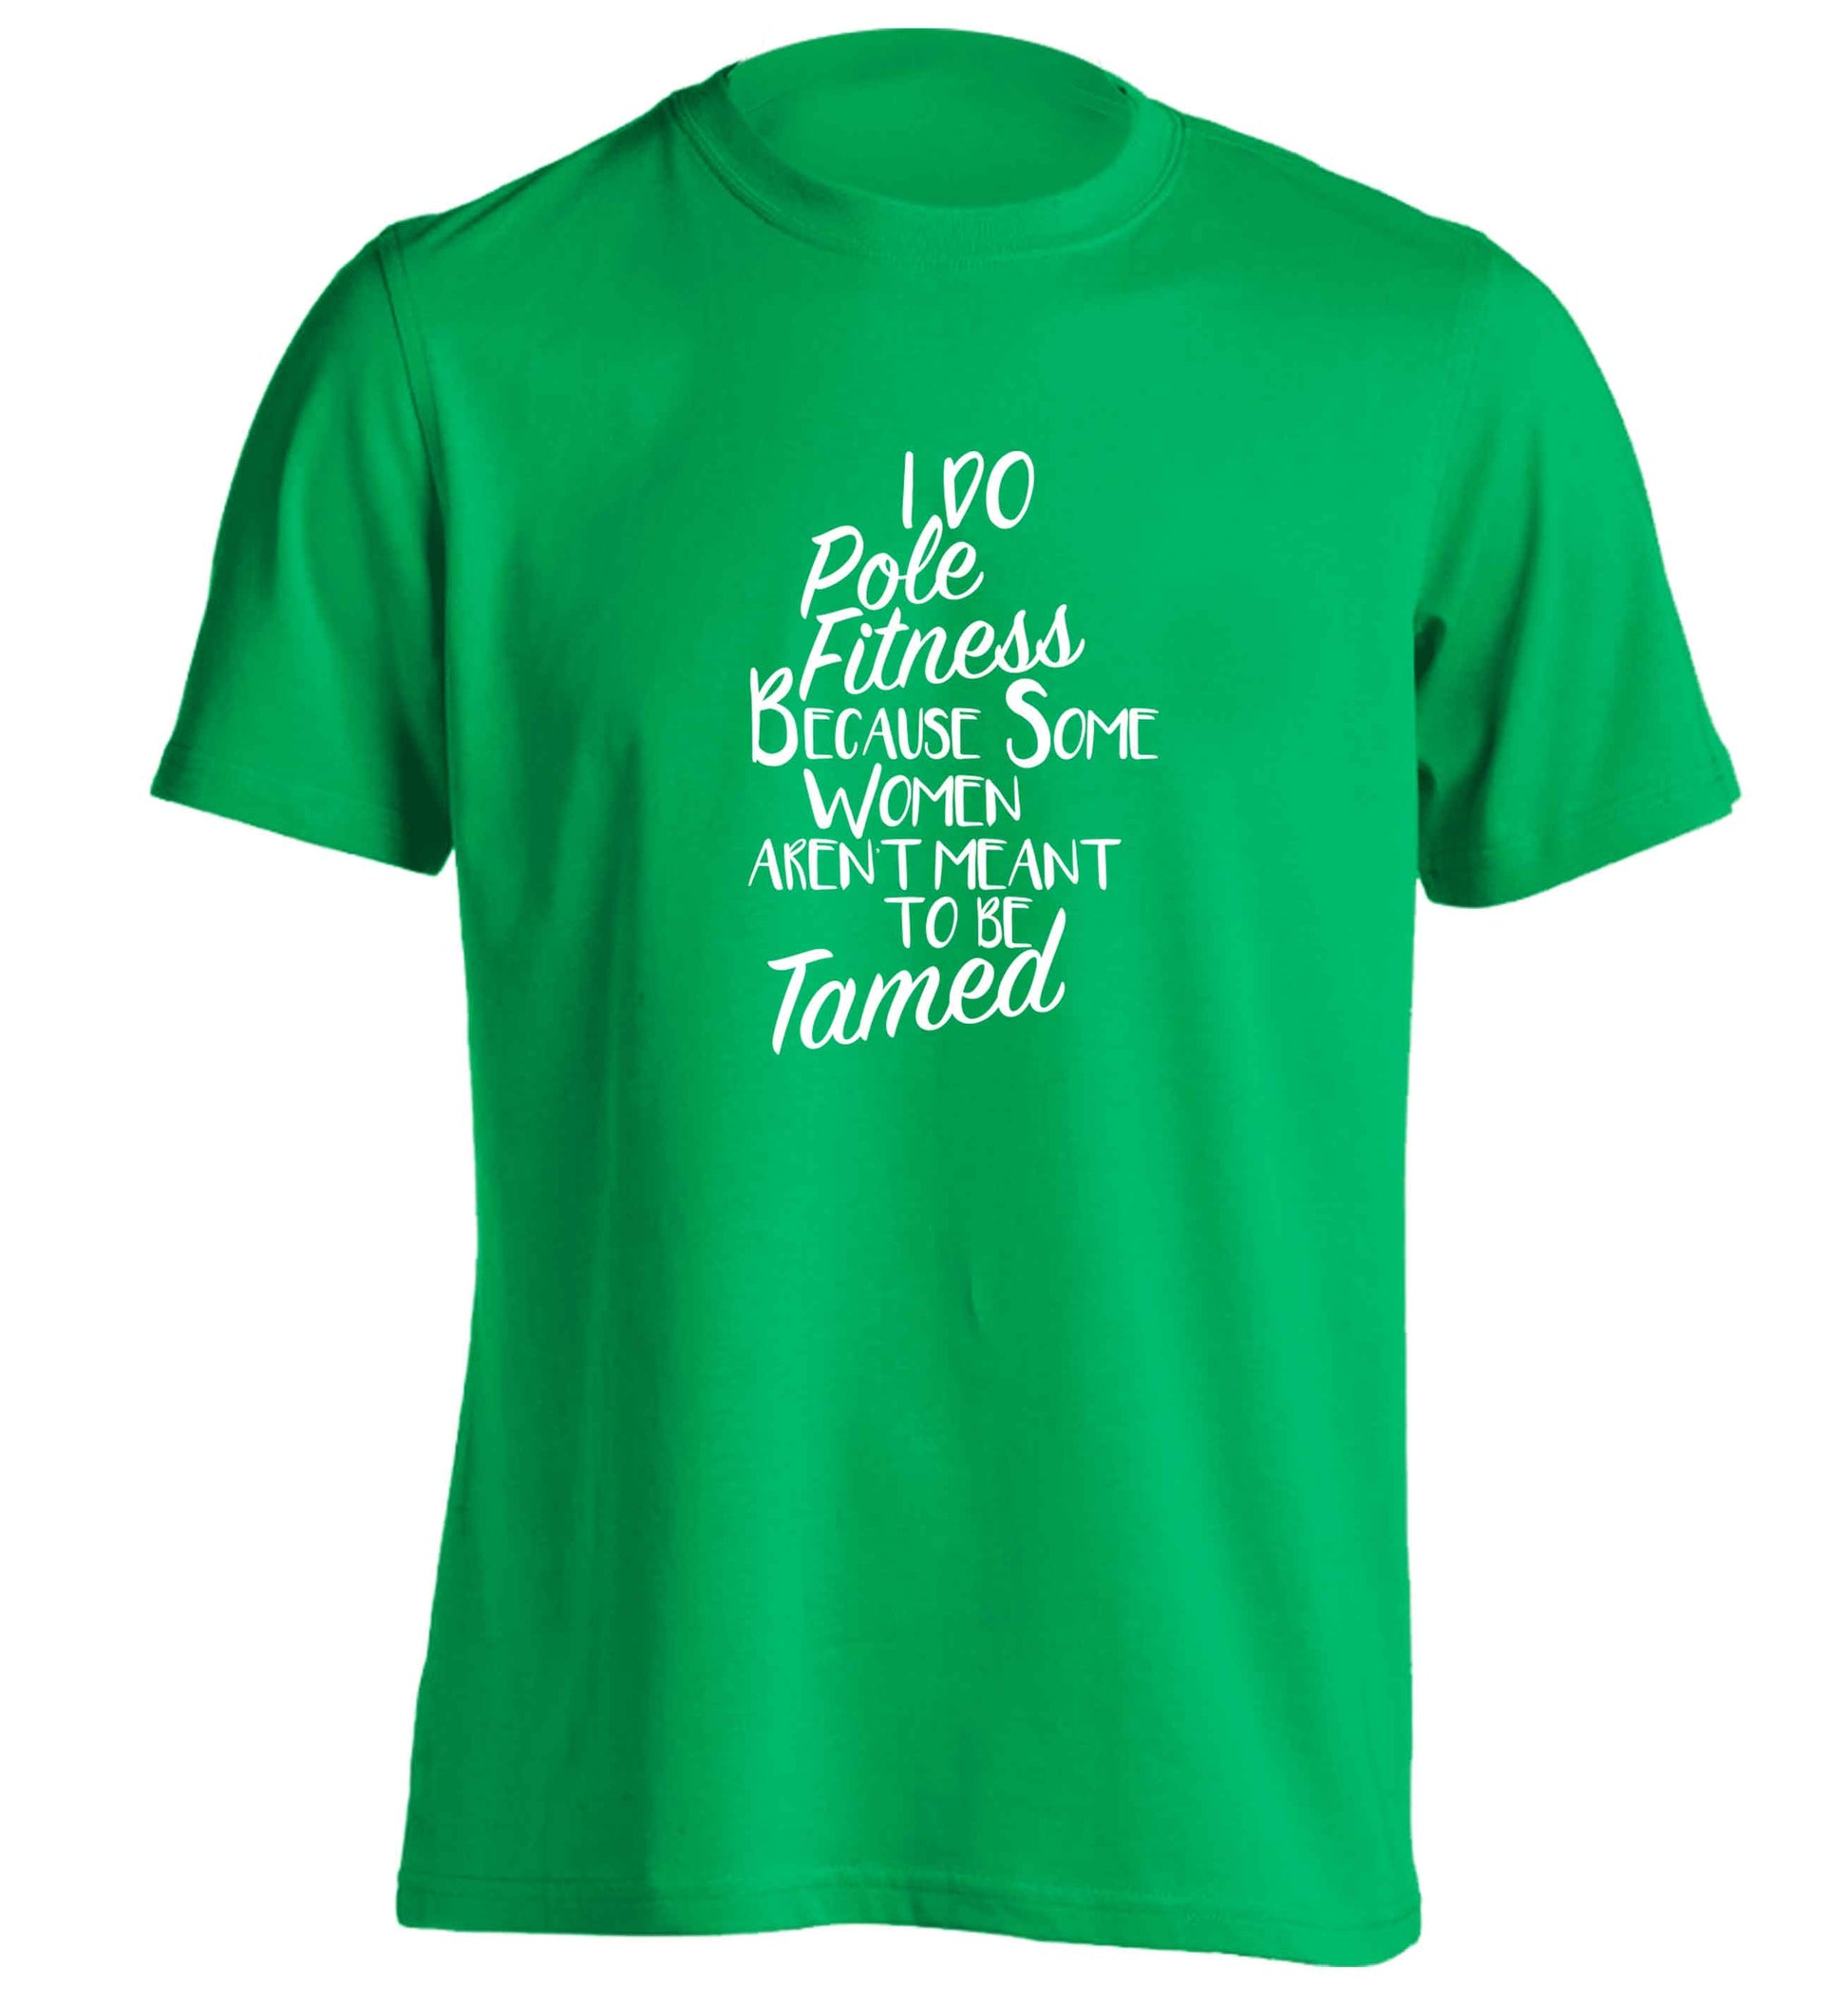 I do pole fitness because some women aren't meant to be tamed adults unisex green Tshirt 2XL